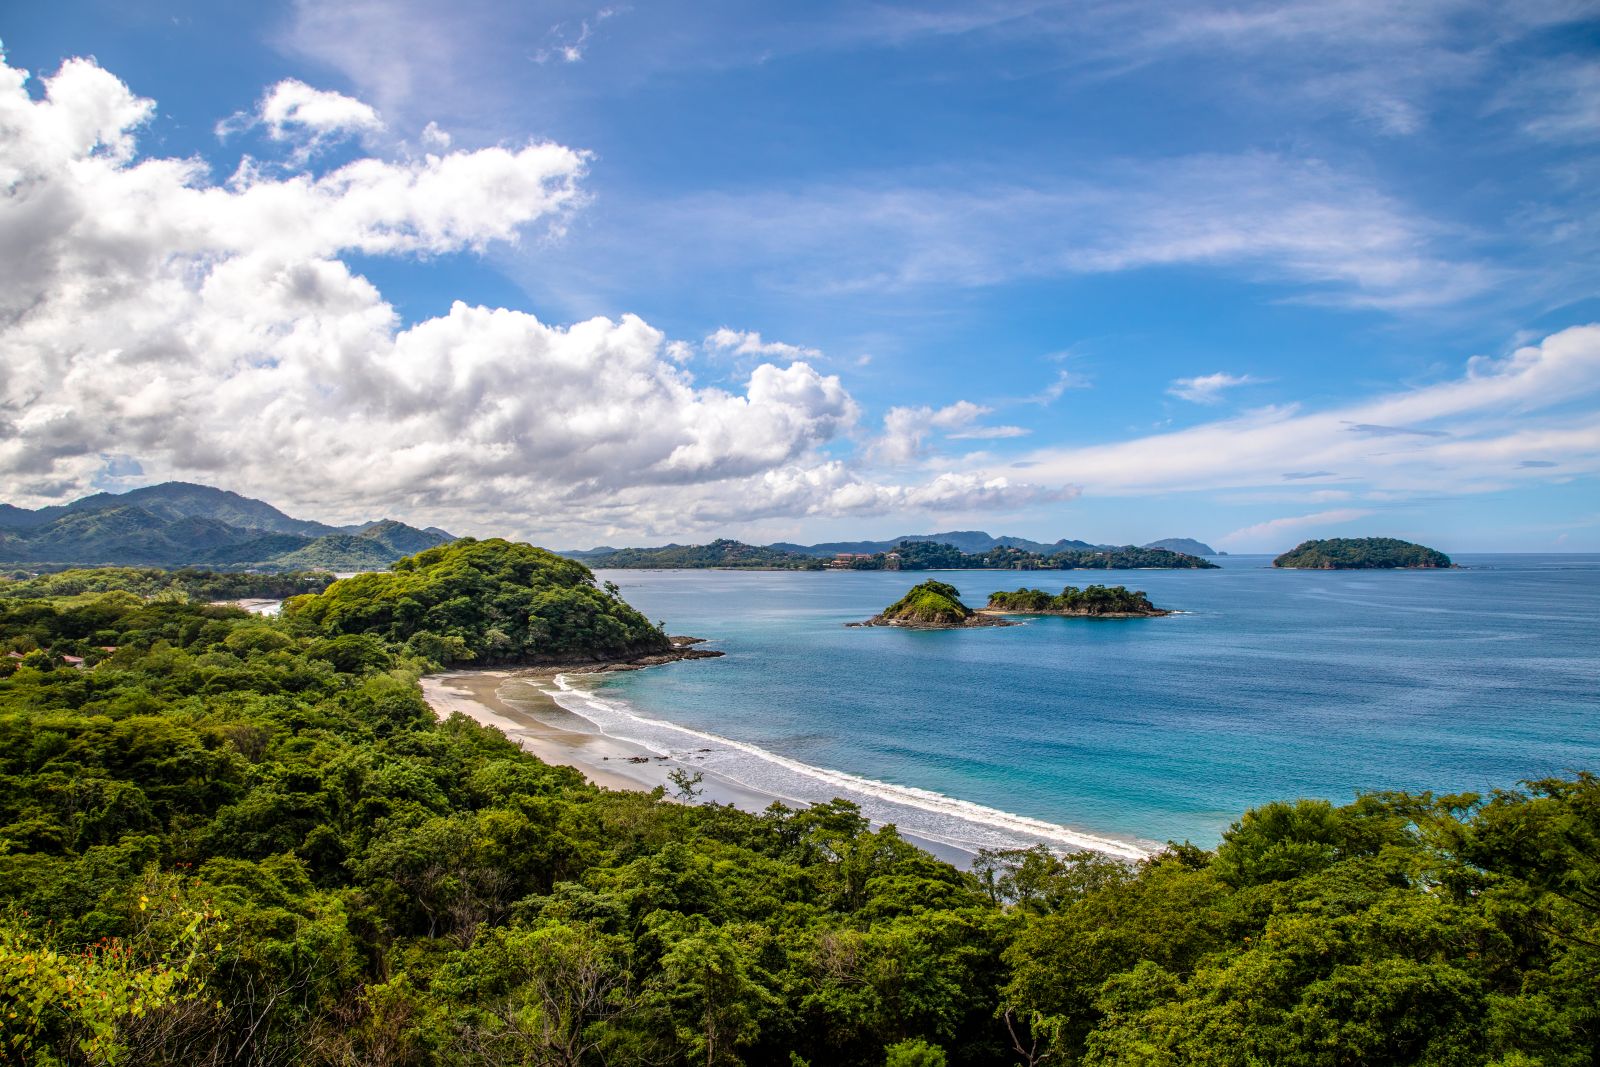 View of a bay surrounded by forest on the Nicoya Peninsula in Costa Rica